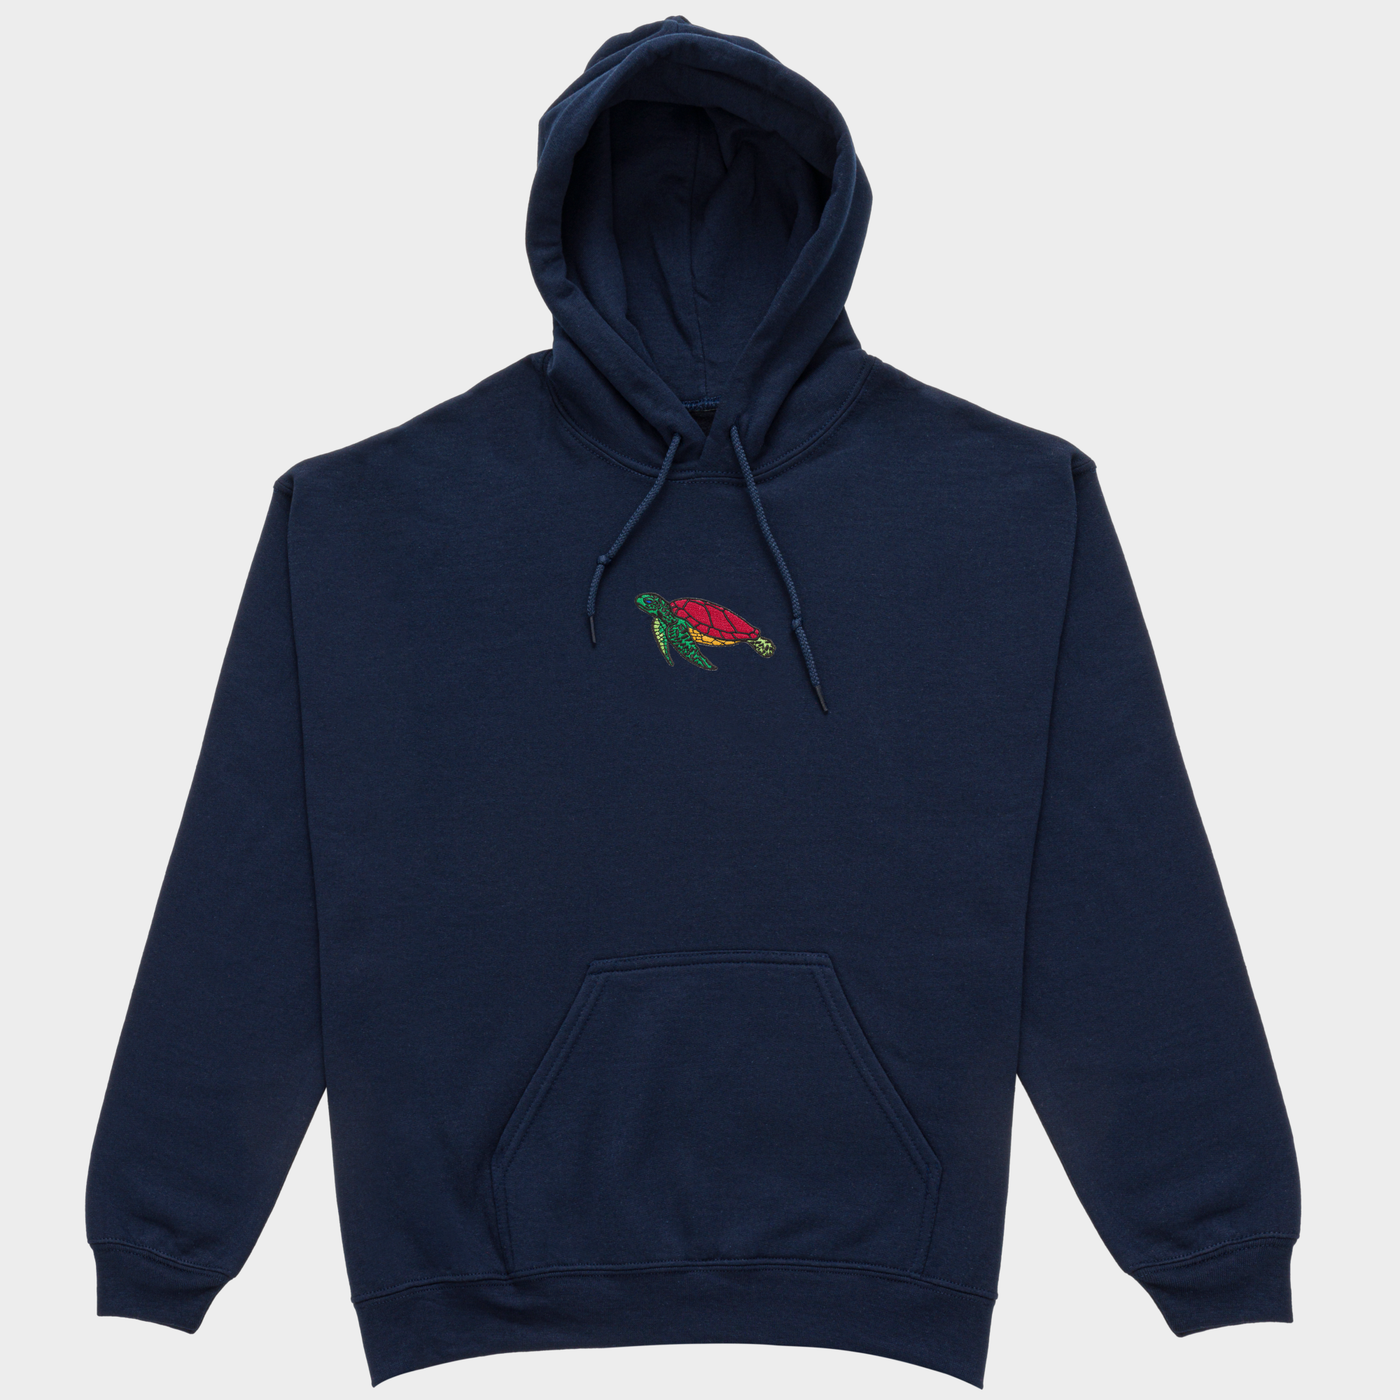 Bobby's Planet Women's Embroidered Sea Turtle Hoodie from Seven Seas Fish Animals Collection in Navy Color#color_navy